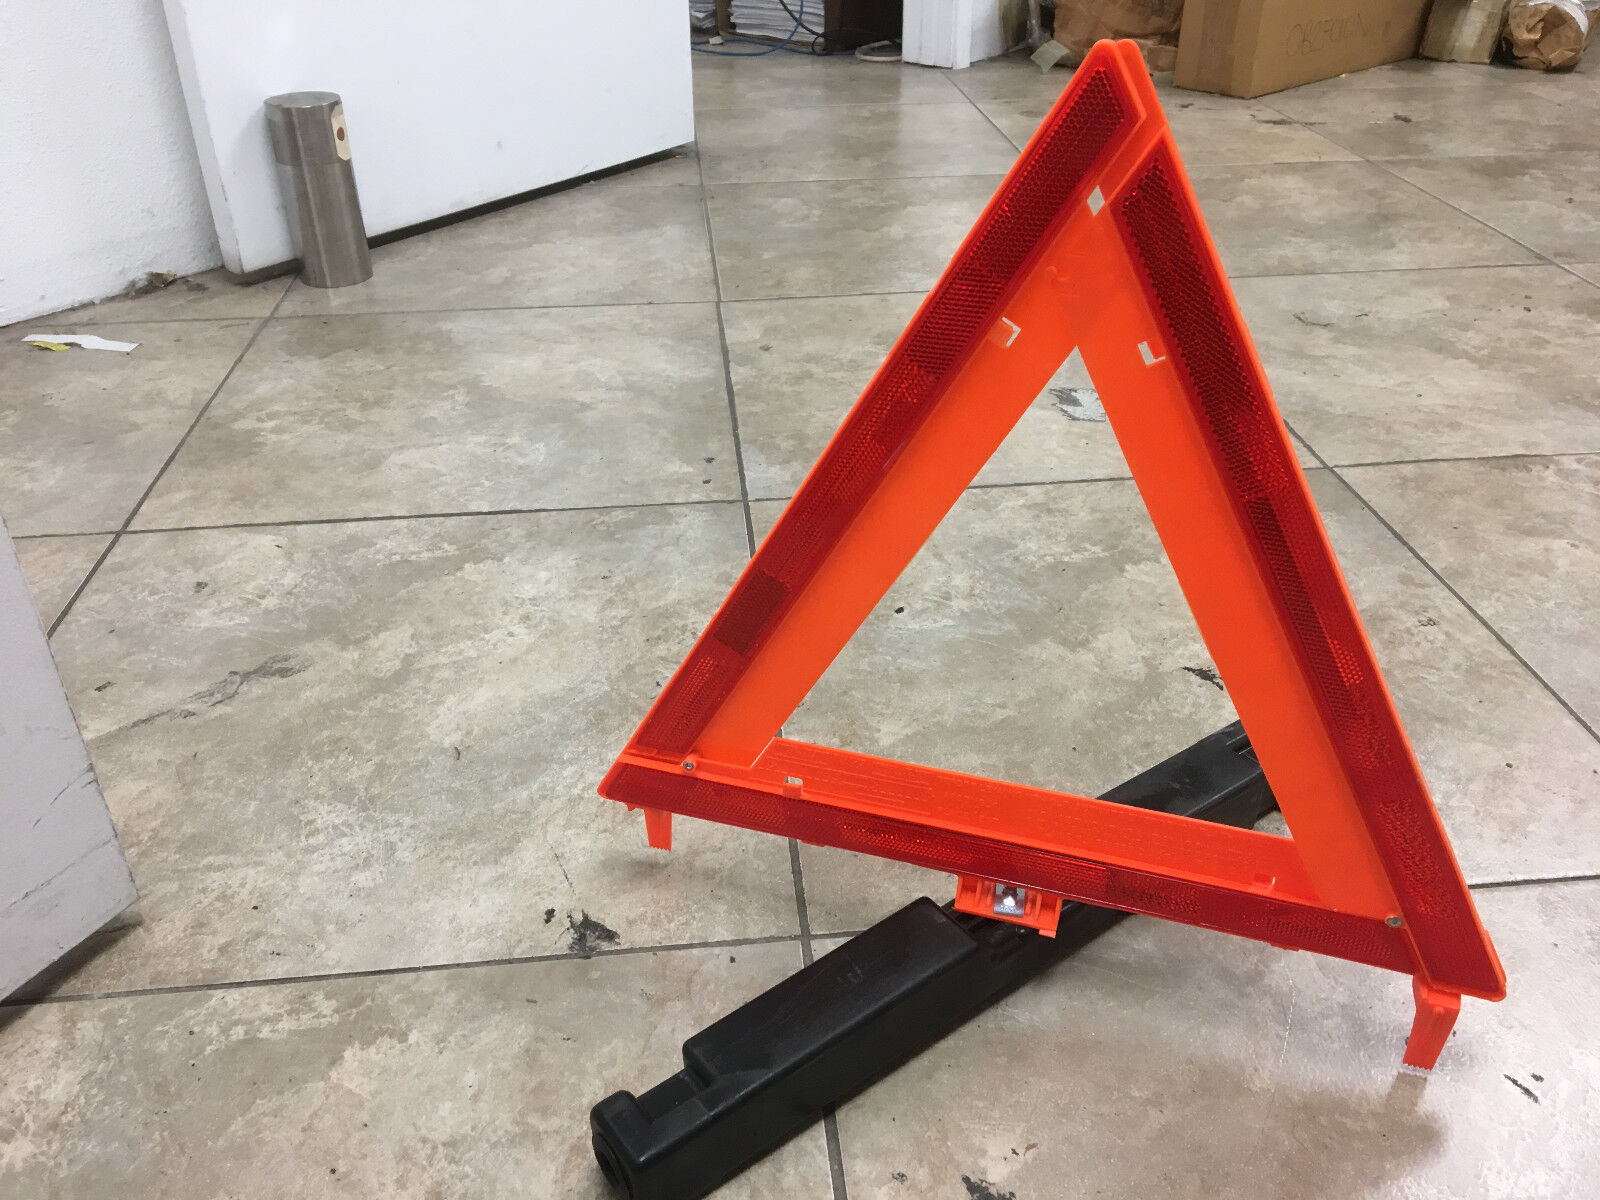 James King & Co. Road Safety Warning Triangle Model 1005 